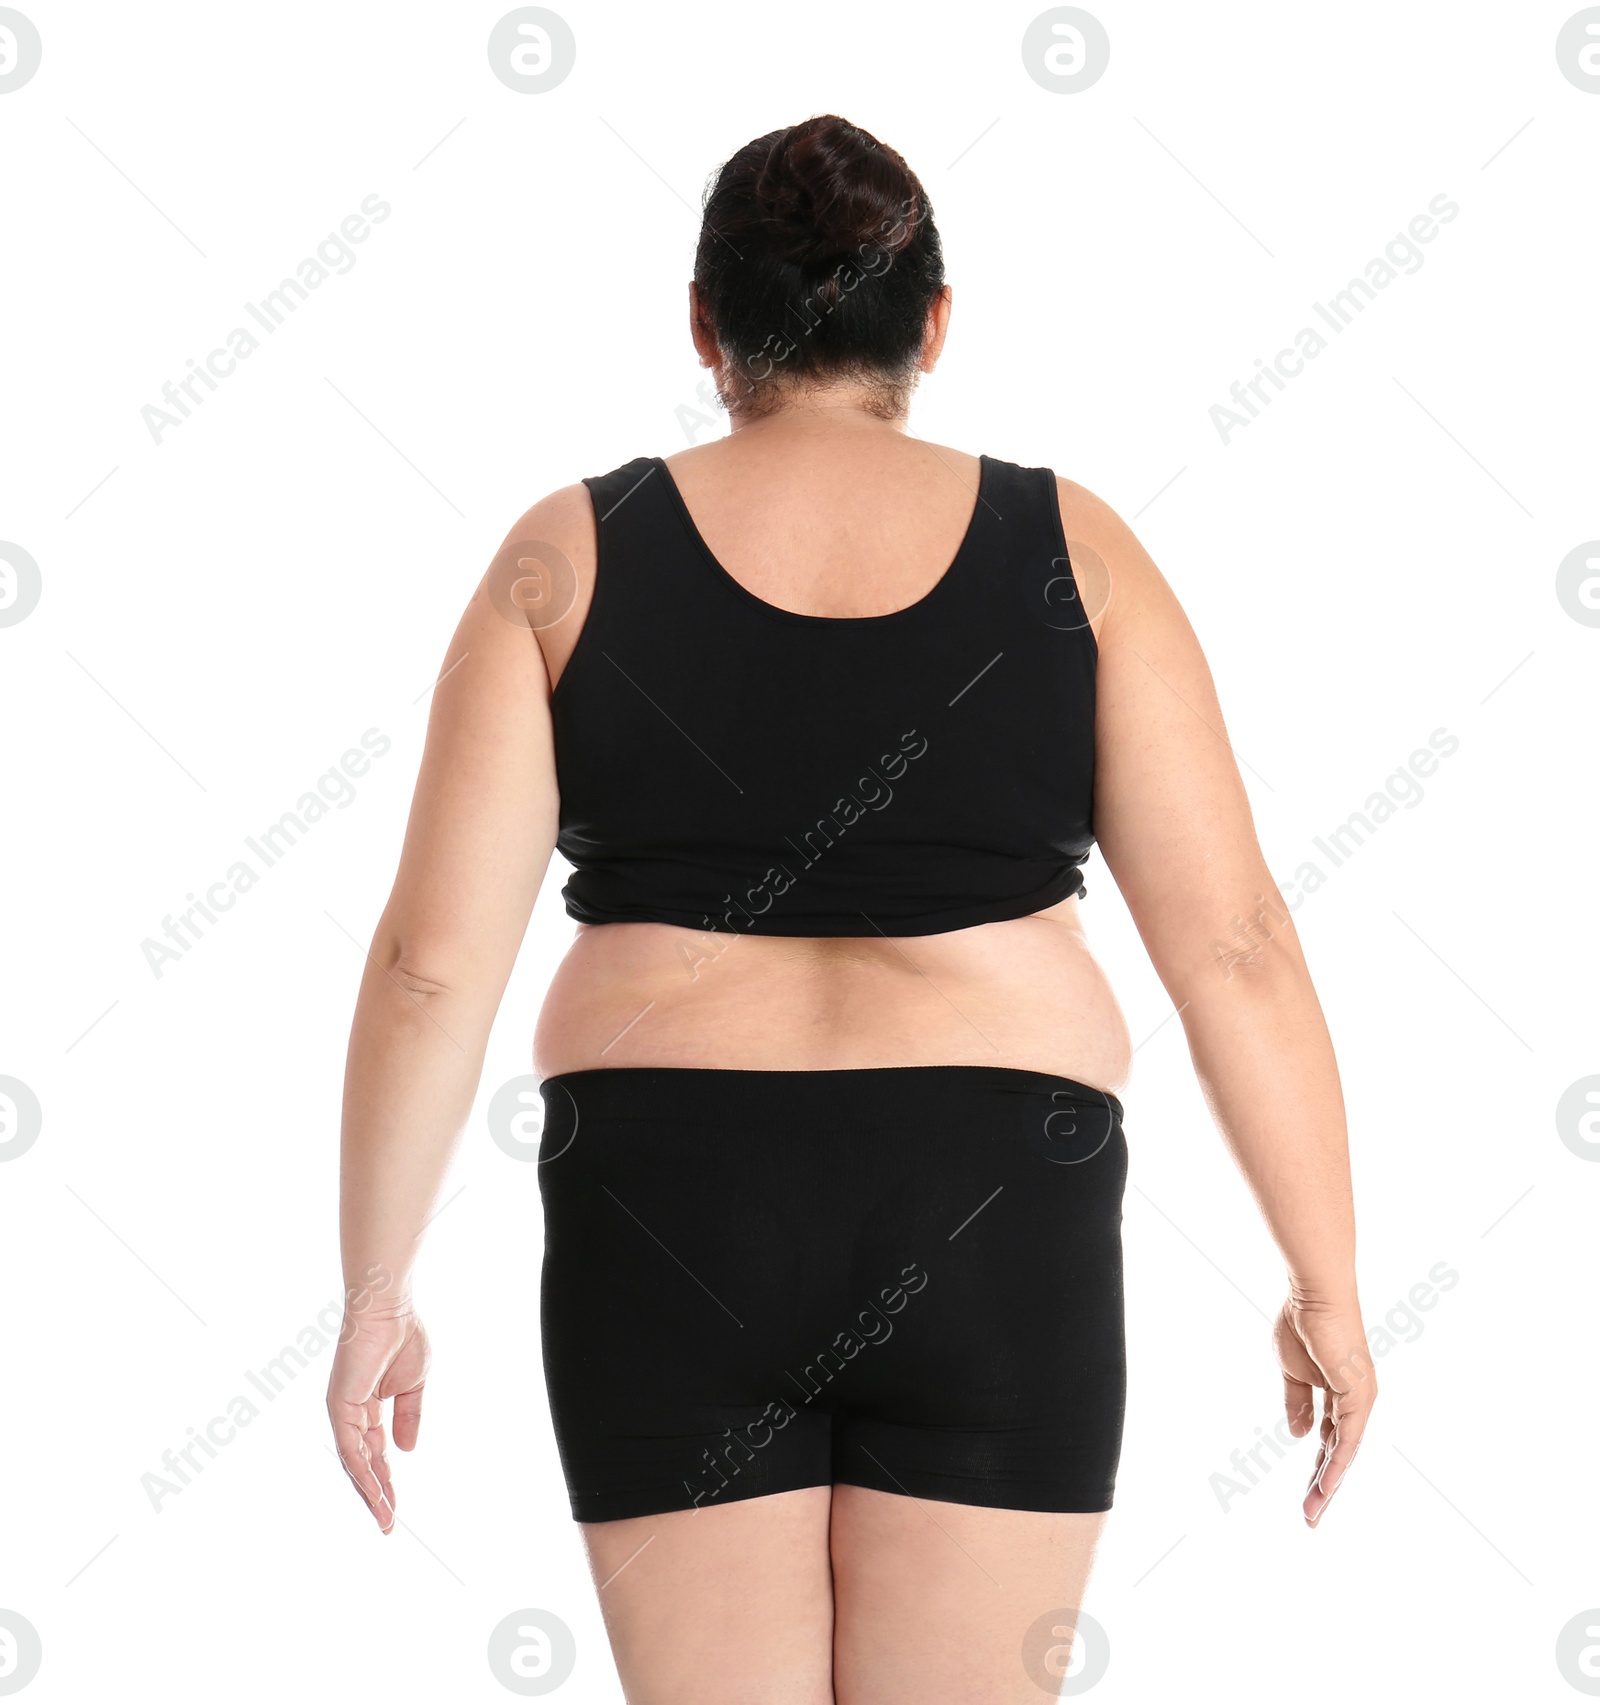 Photo of Fat woman on white background. Weight loss